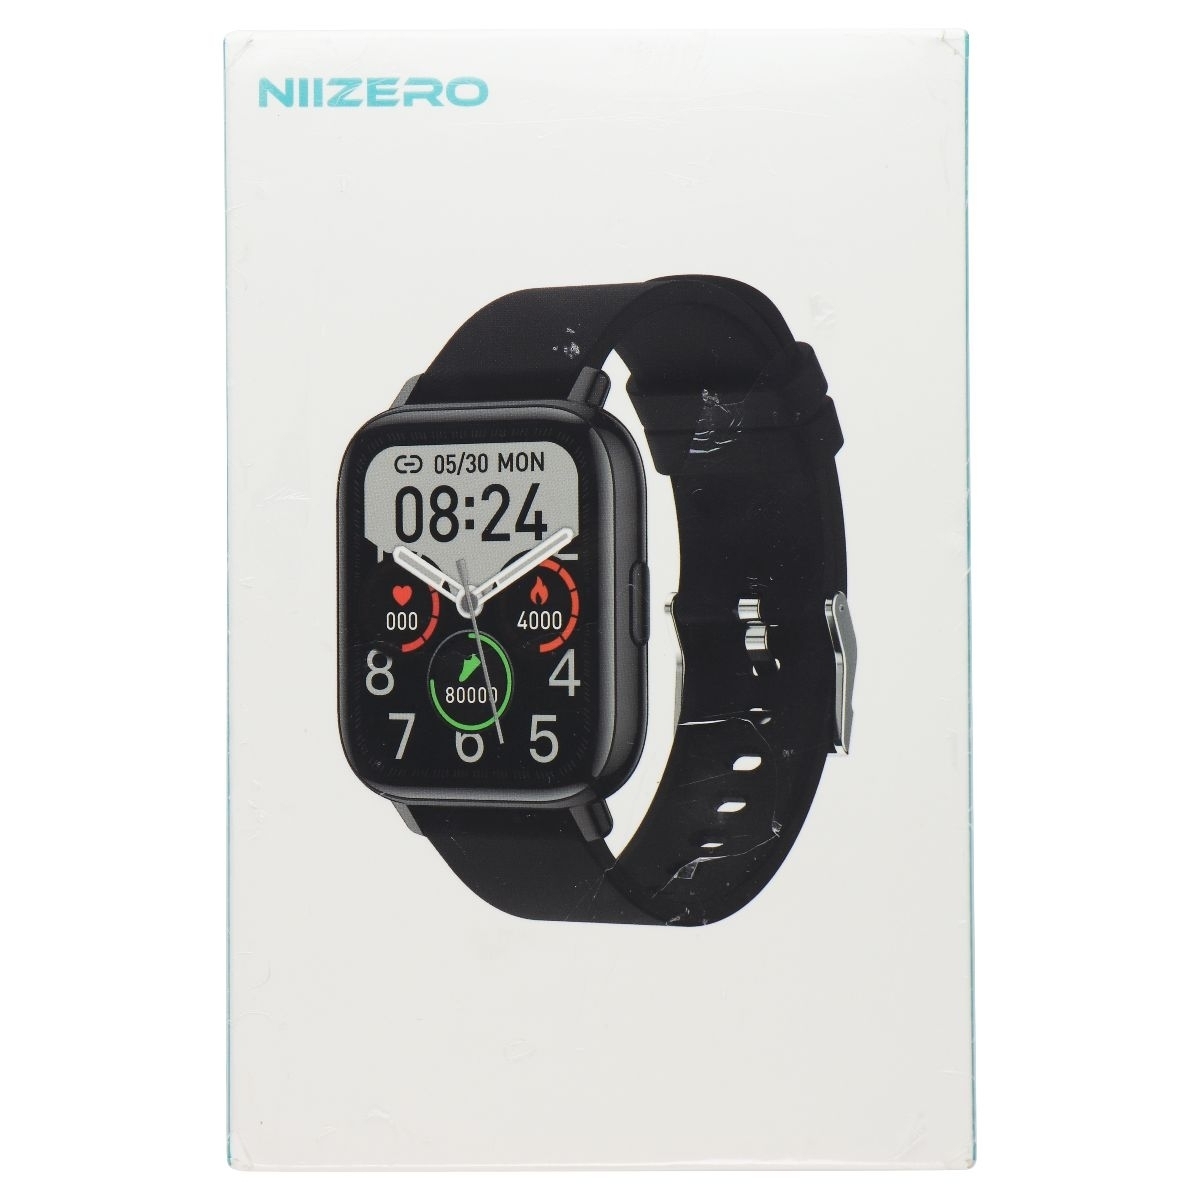 Niizero B82 Smartwatch For Android And IOS (works With Gloryfit App) - Black (Refurbished)